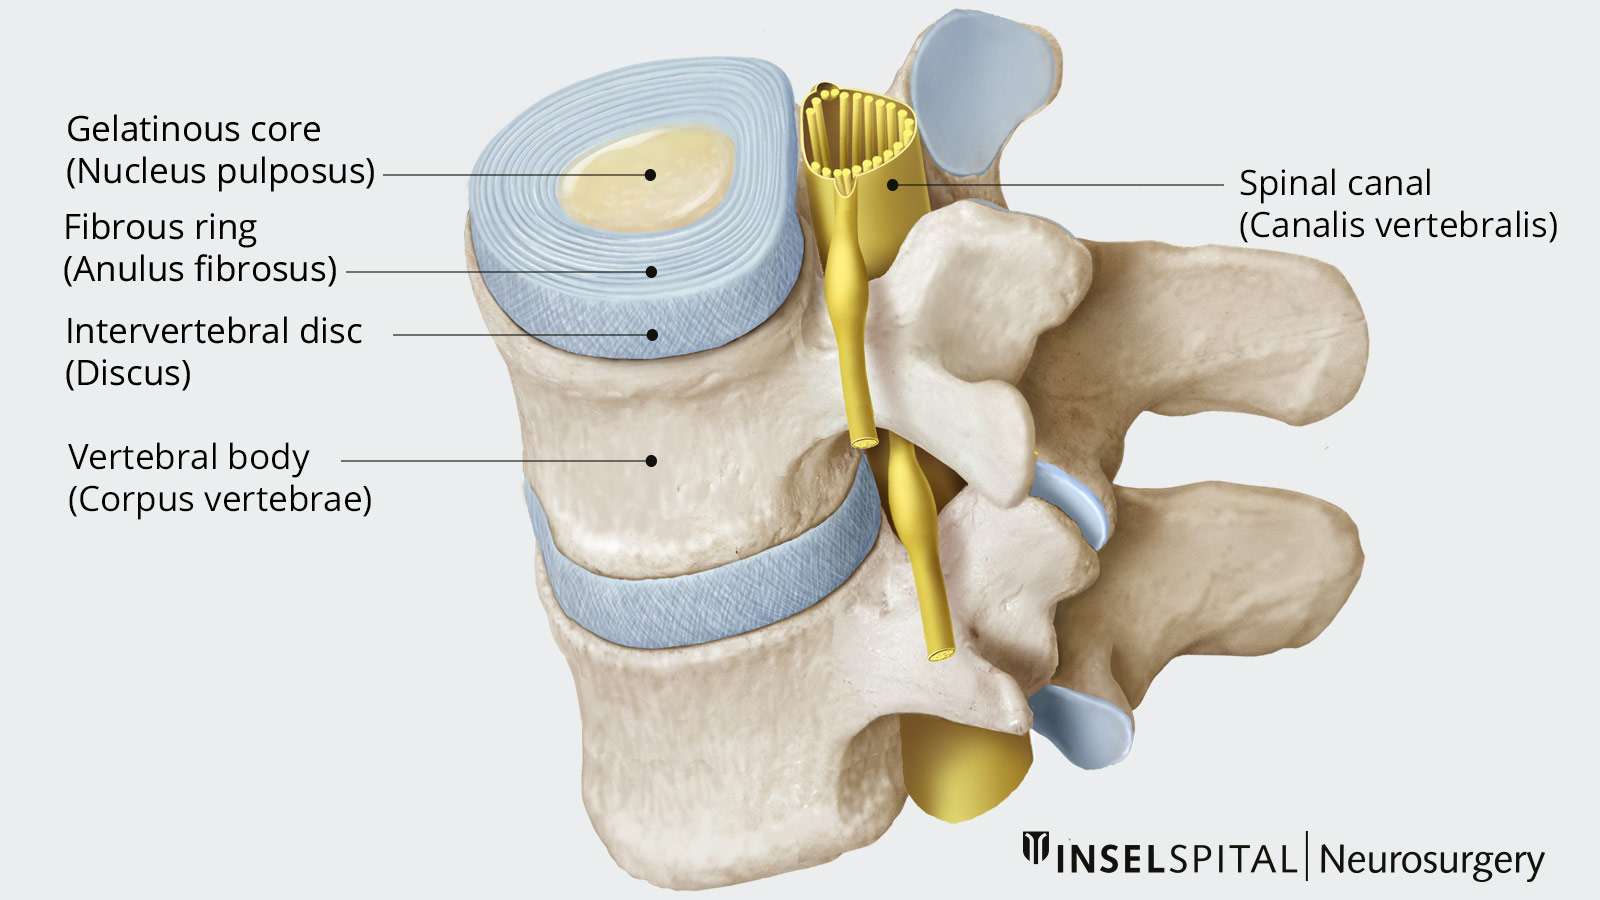 Color drawing of the structure of the spine with vertebrae and intervertebral discs